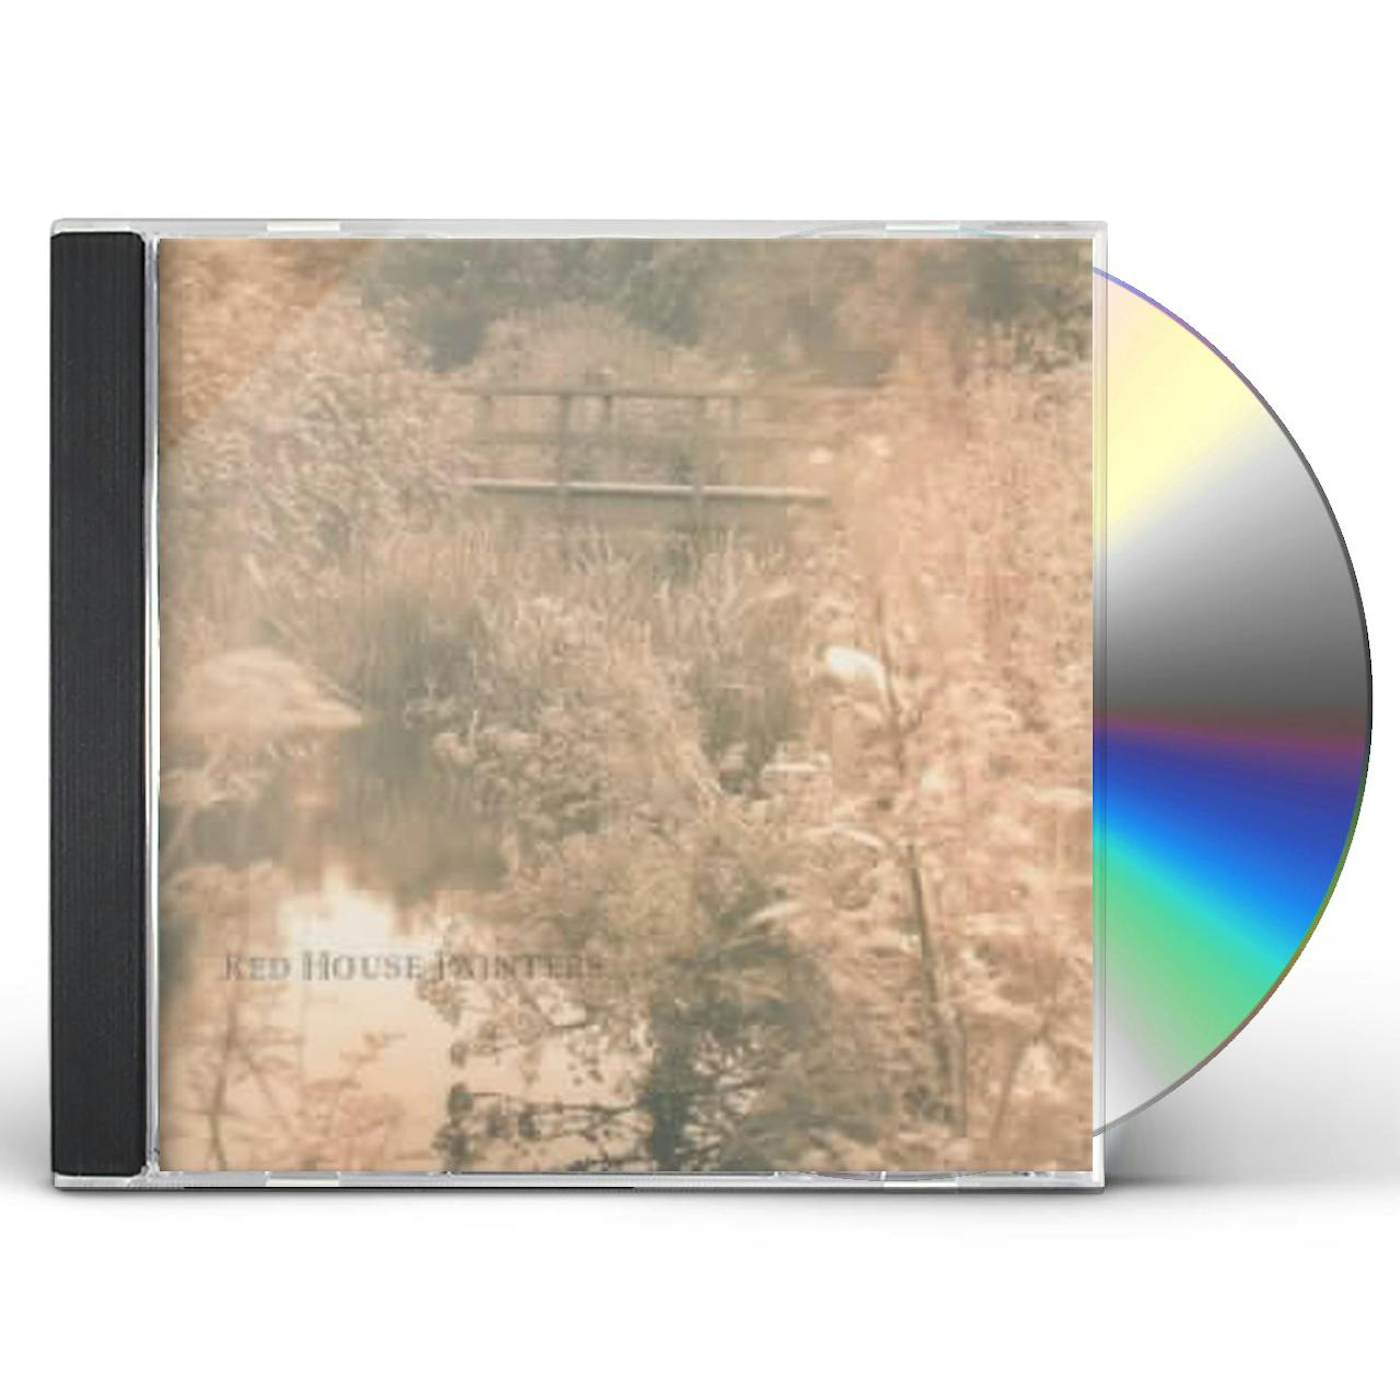 RED HOUSE PAINTERS 2 CD